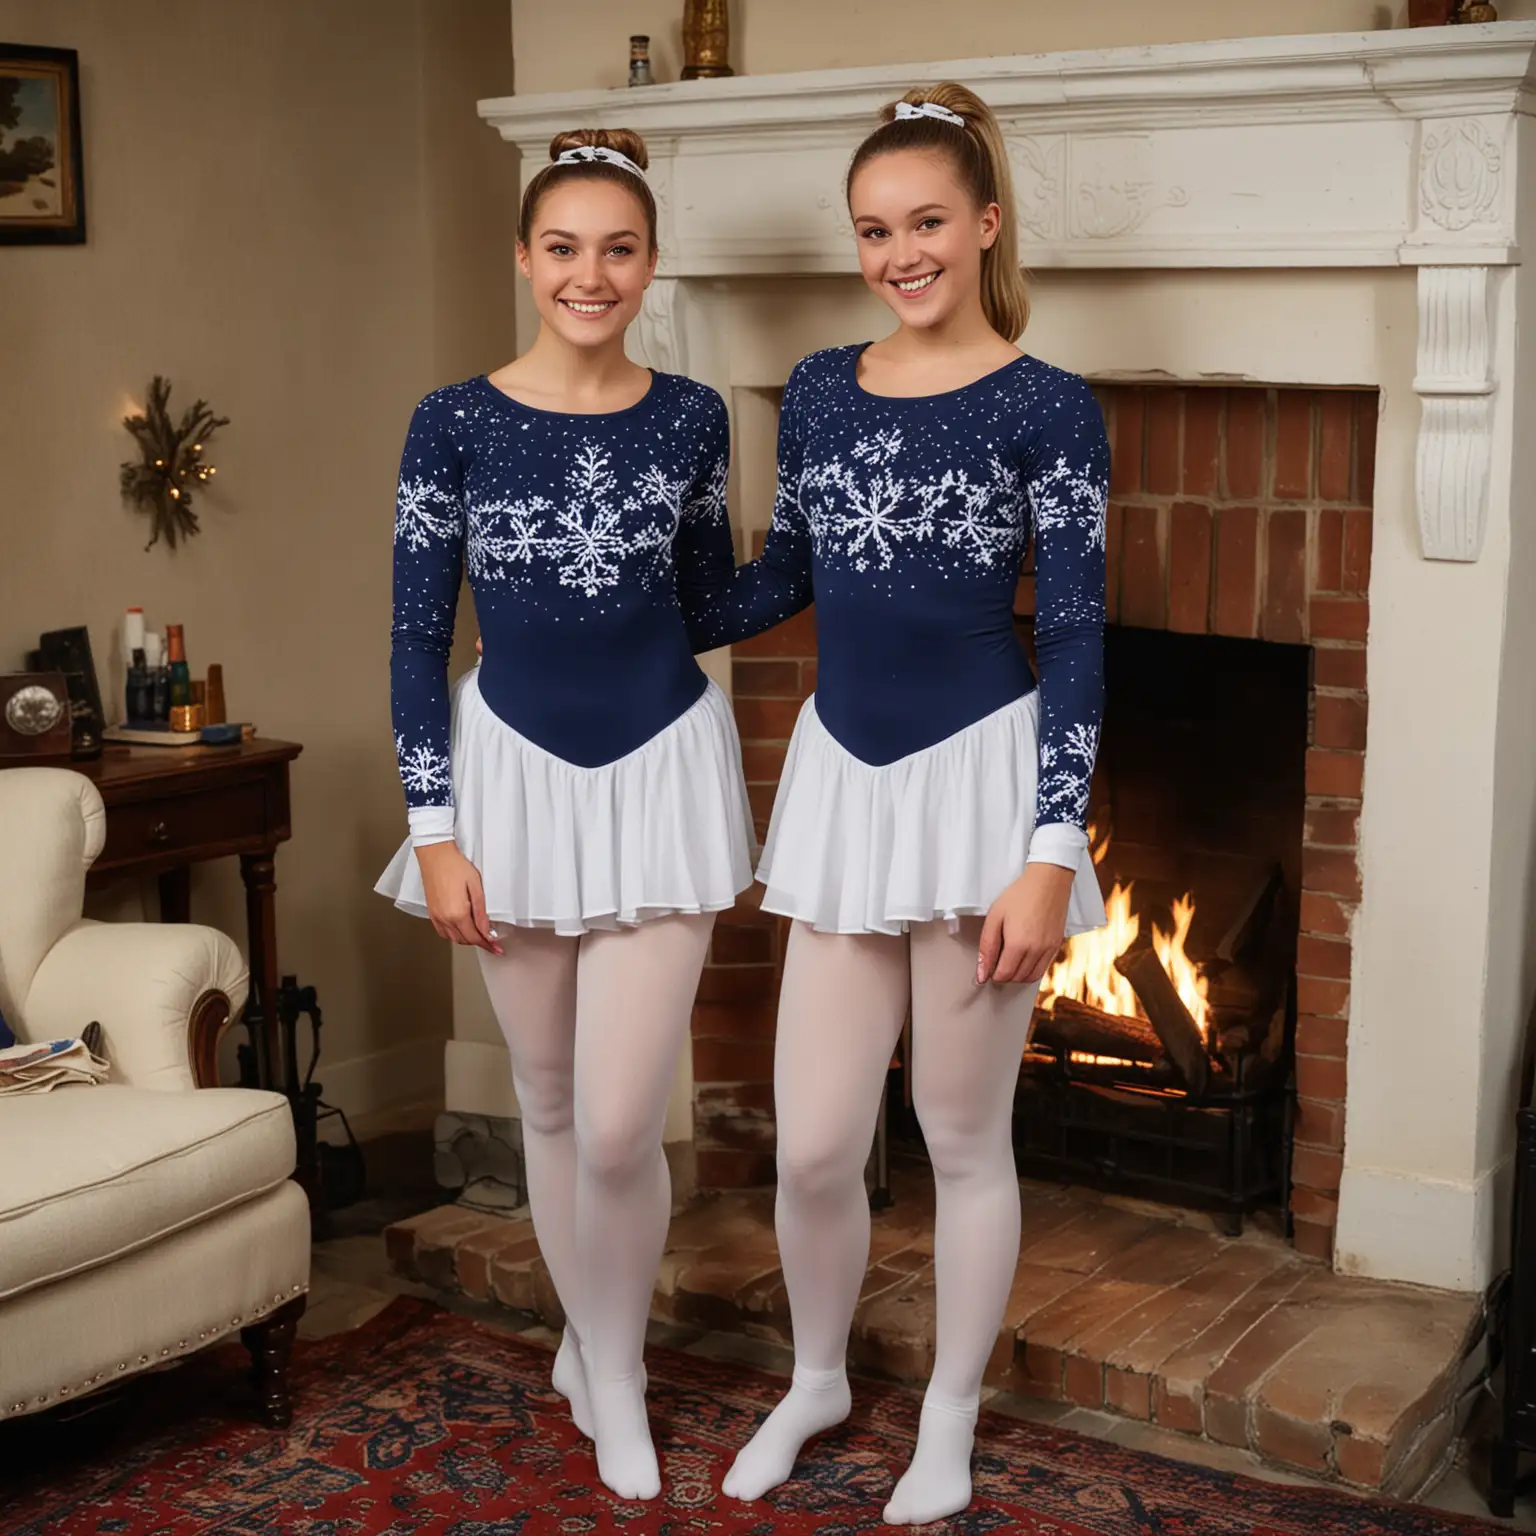 Two-Smiling-College-Women-in-Snowflake-Costumes-by-Fireplace